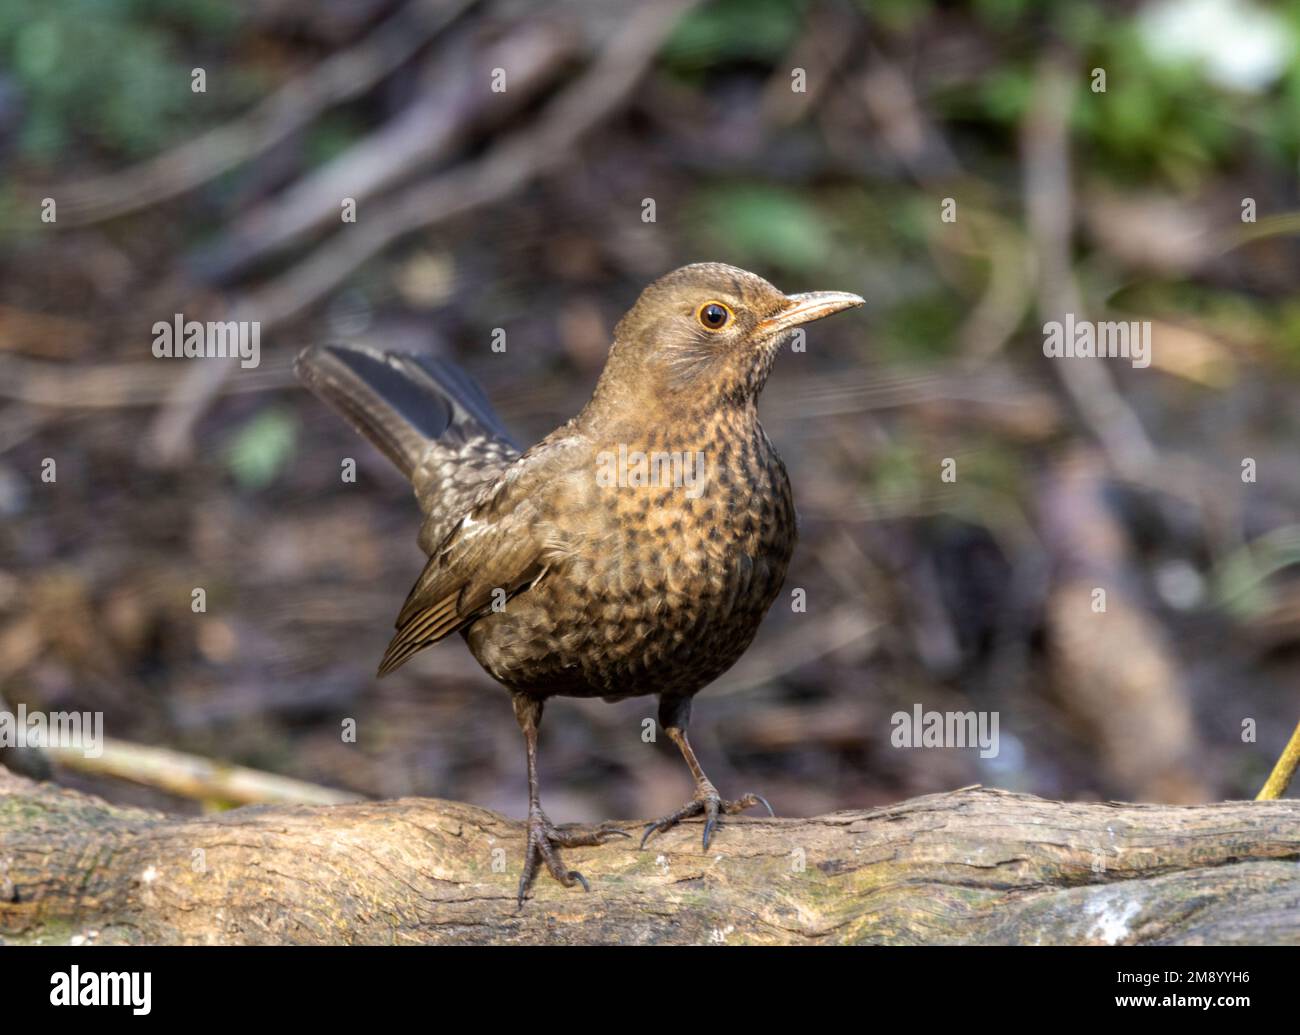 The Blackbird is a familiar and common garden bird in the UK. The female is more cryptically marked than the male, having less bold colouration. Stock Photo